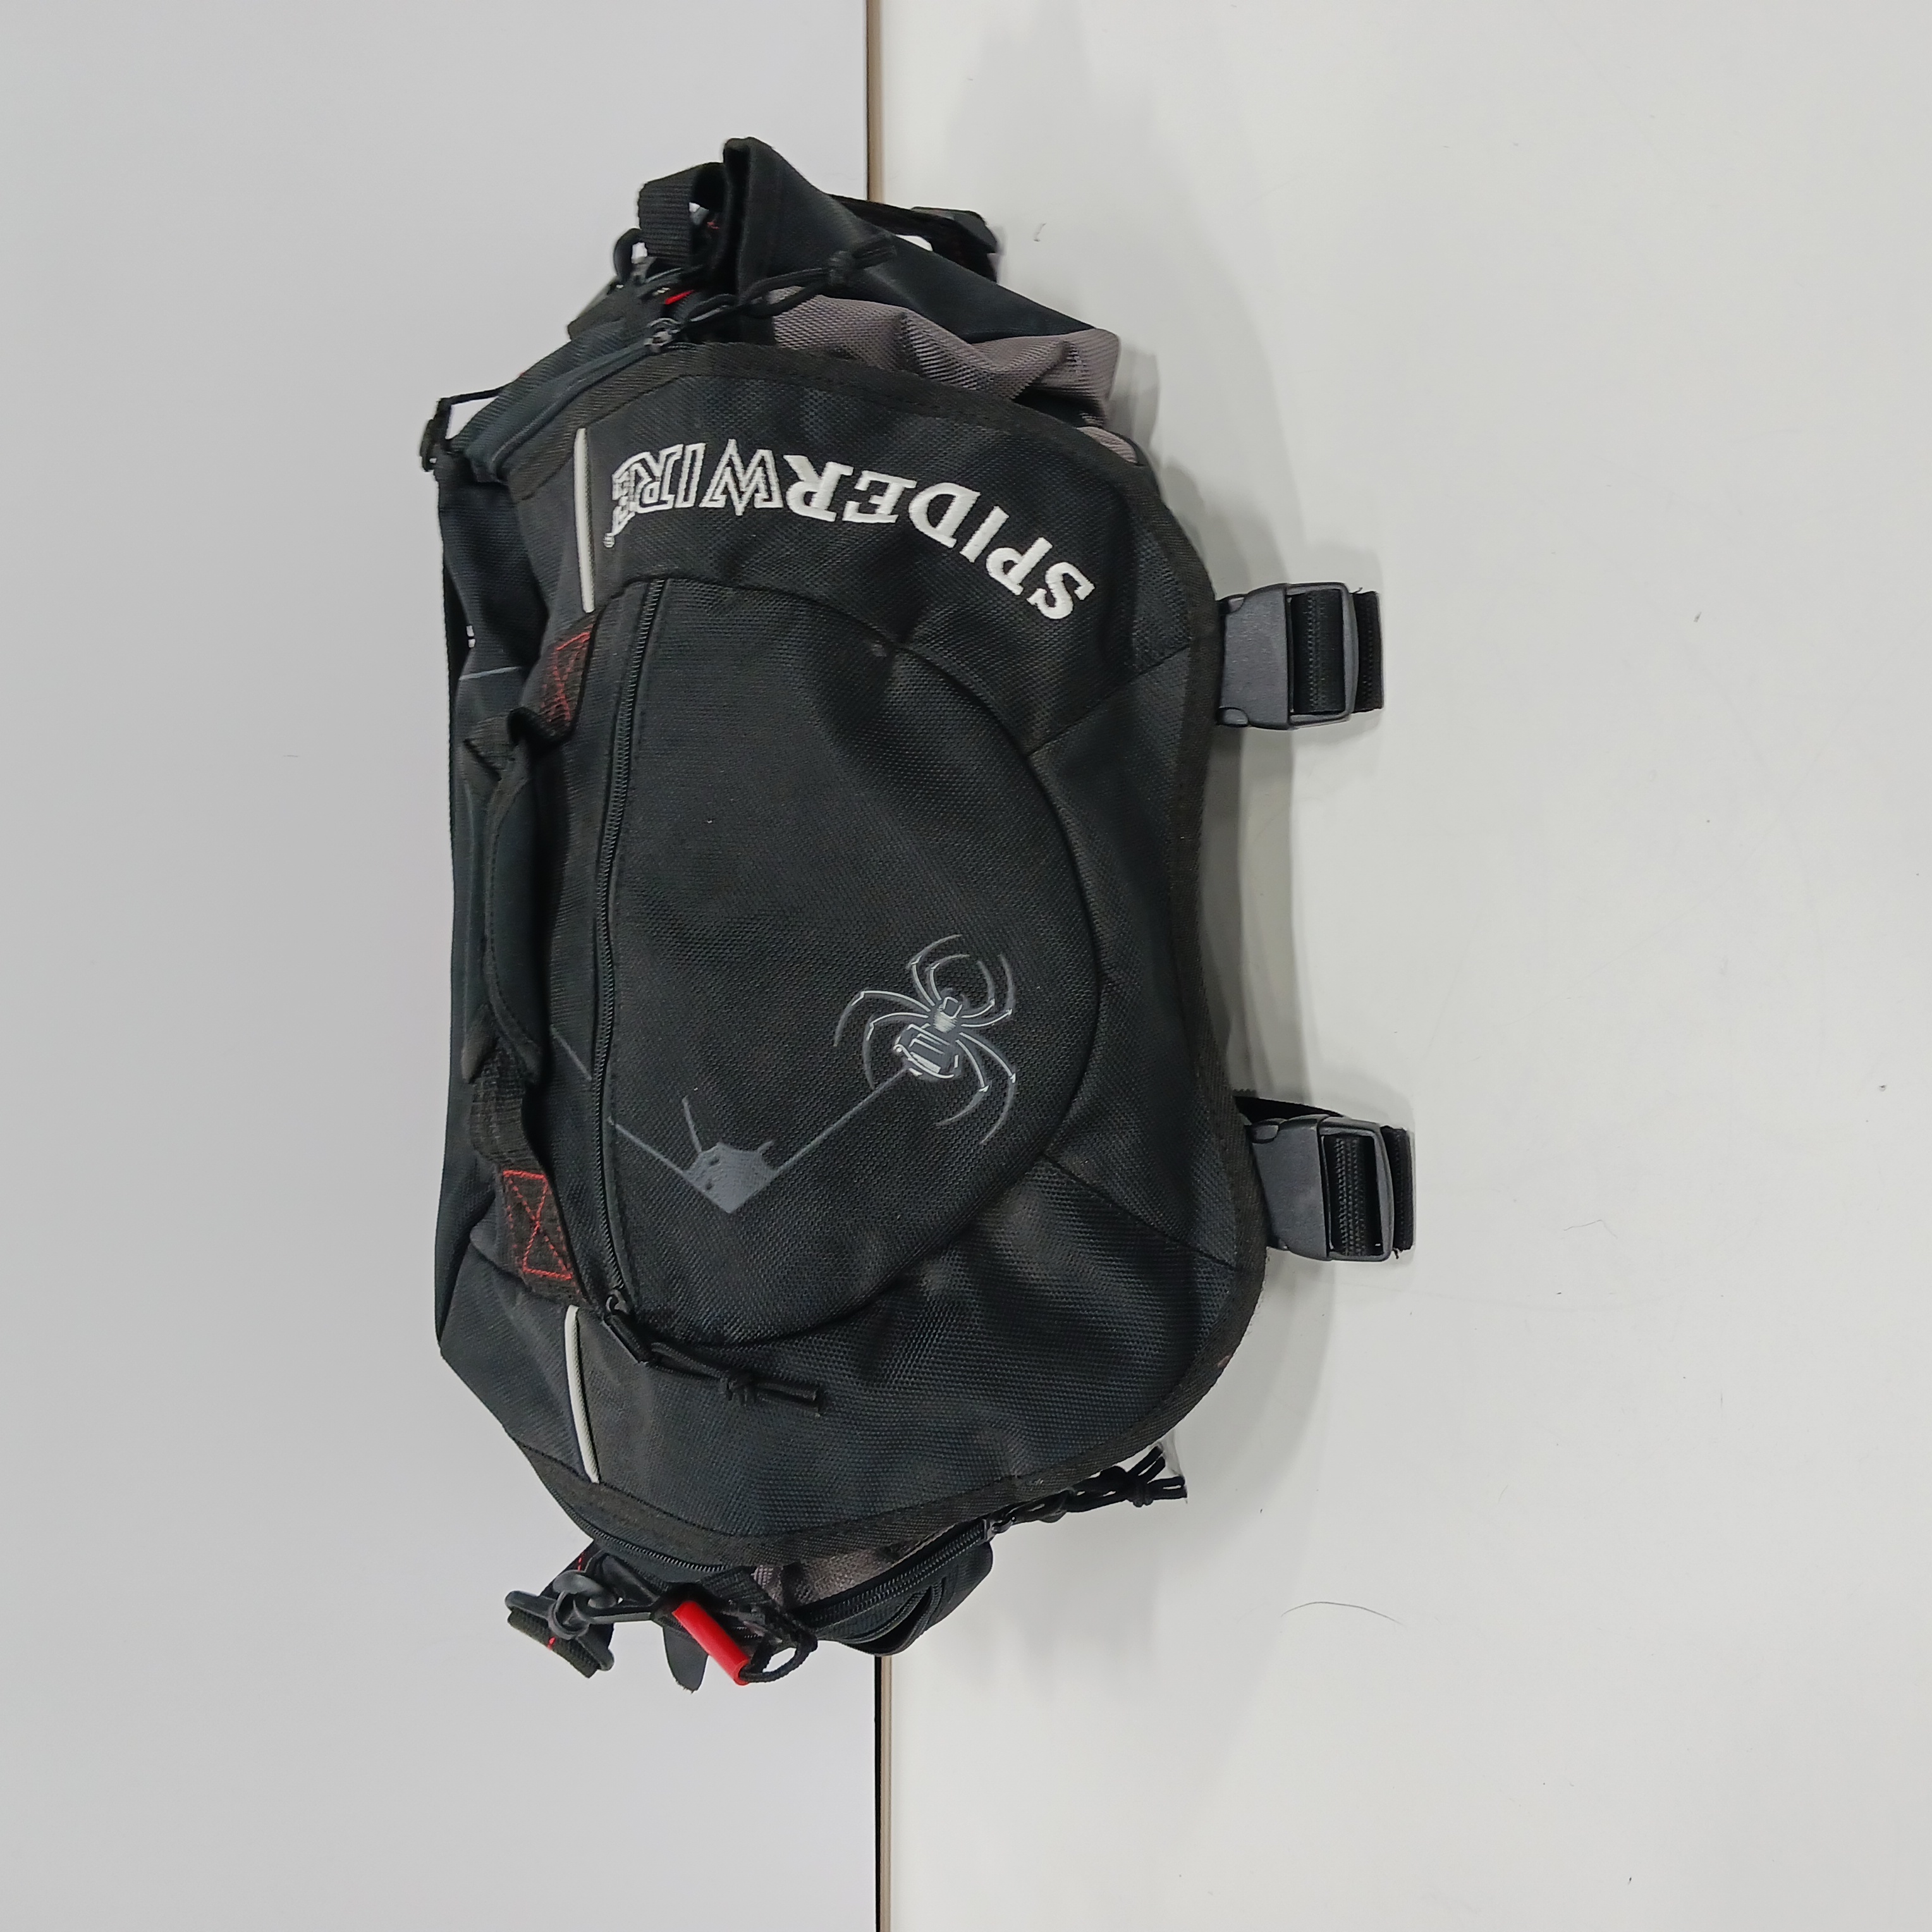 Buy the Spider Wire Wolf Tackle Bag 38.8 Liter